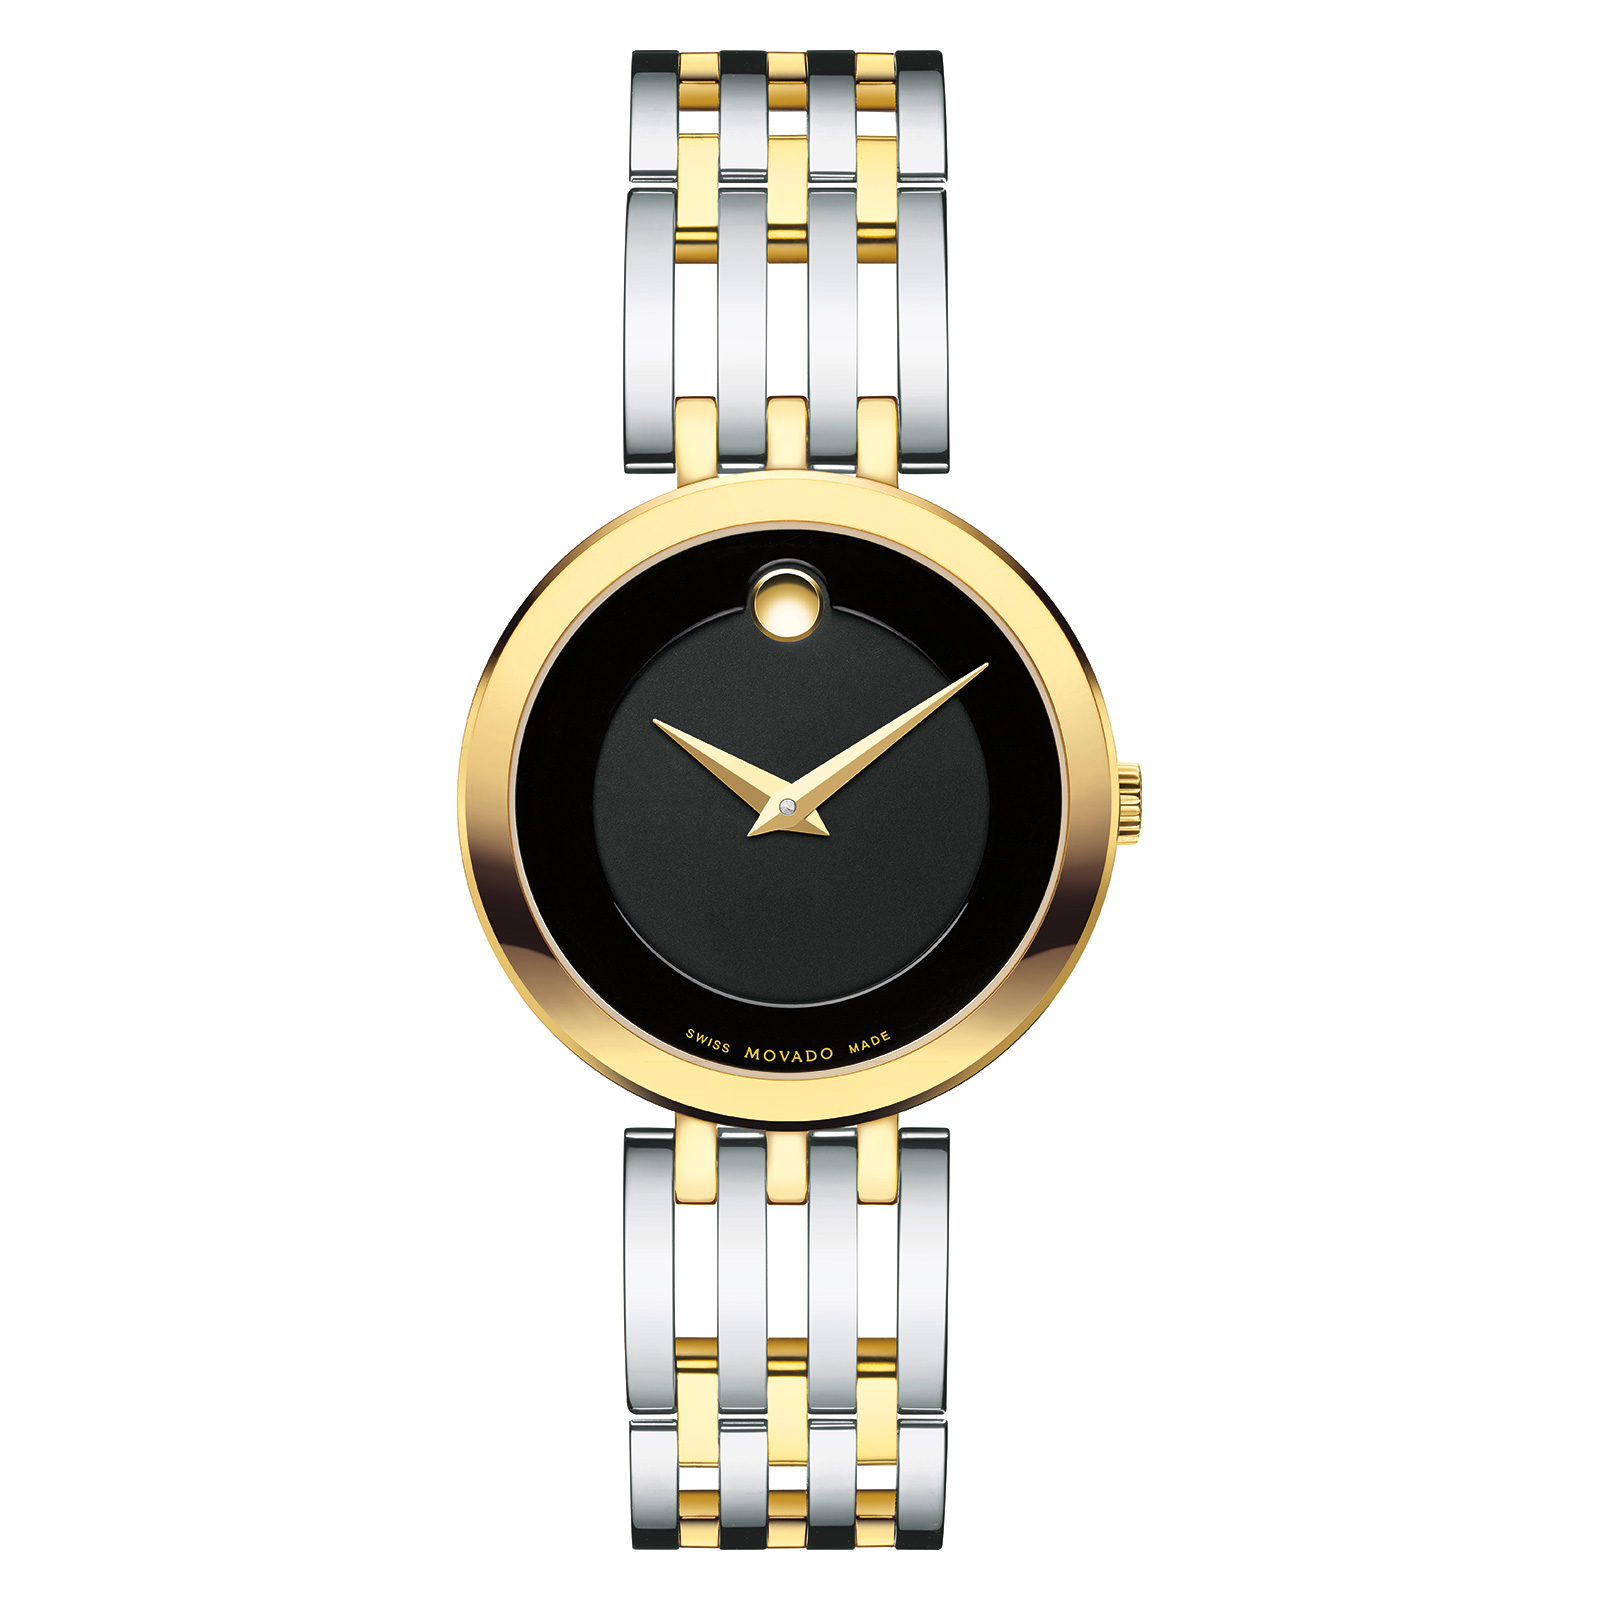 Discover Movado Watches | Watches – Switzerland of Prices Collections Online and